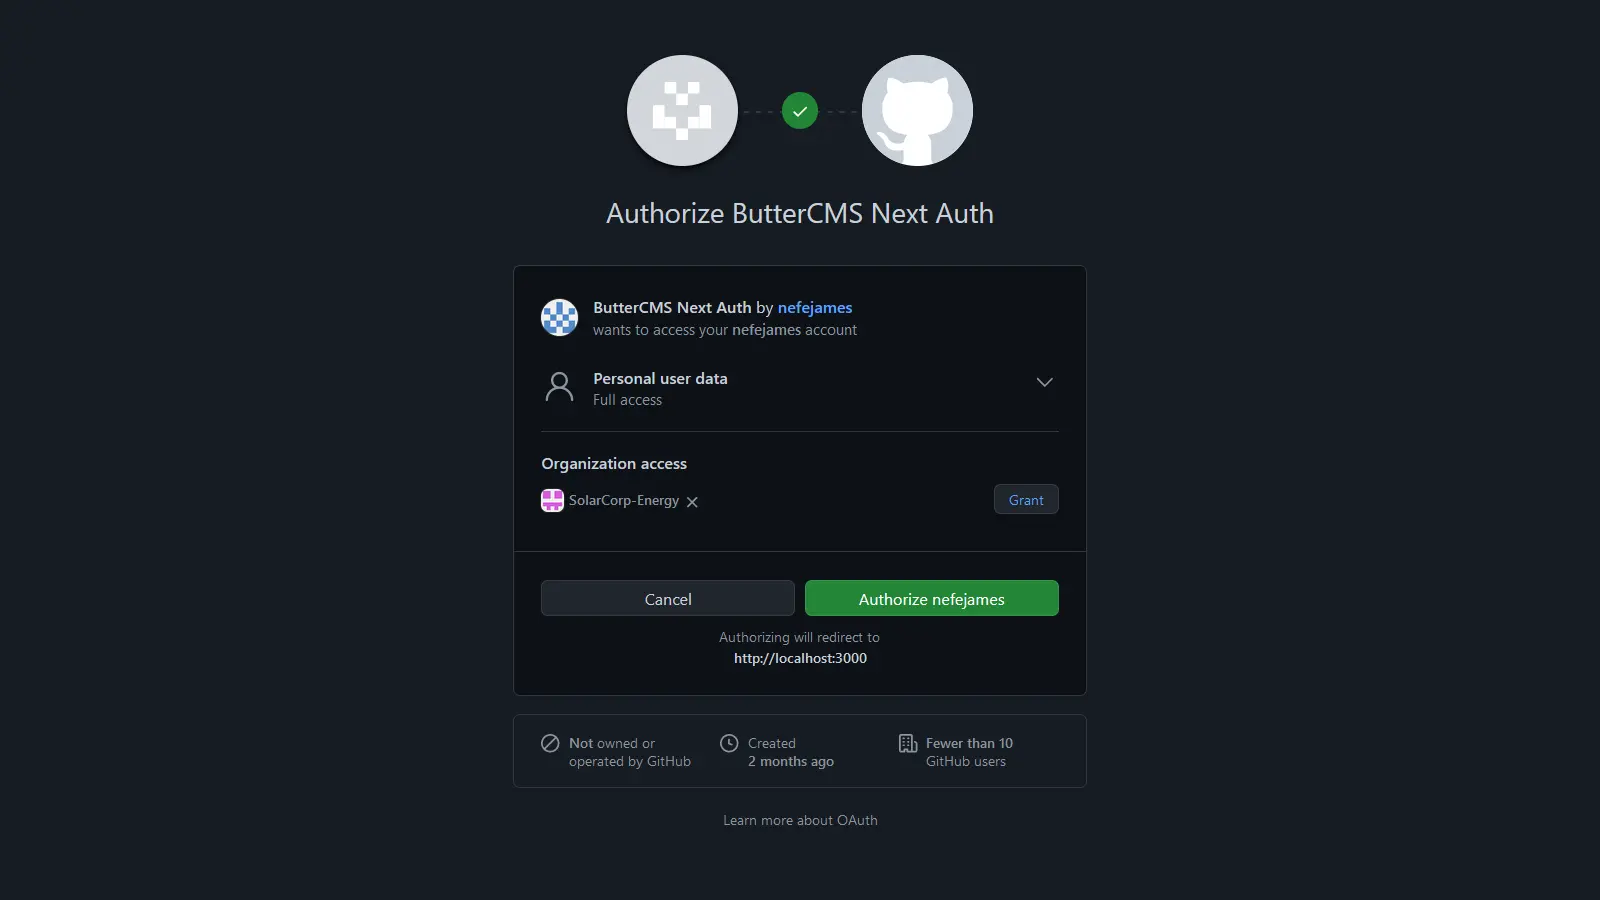 Third step of authentication flow: Authorize ButterCMS NextAuth